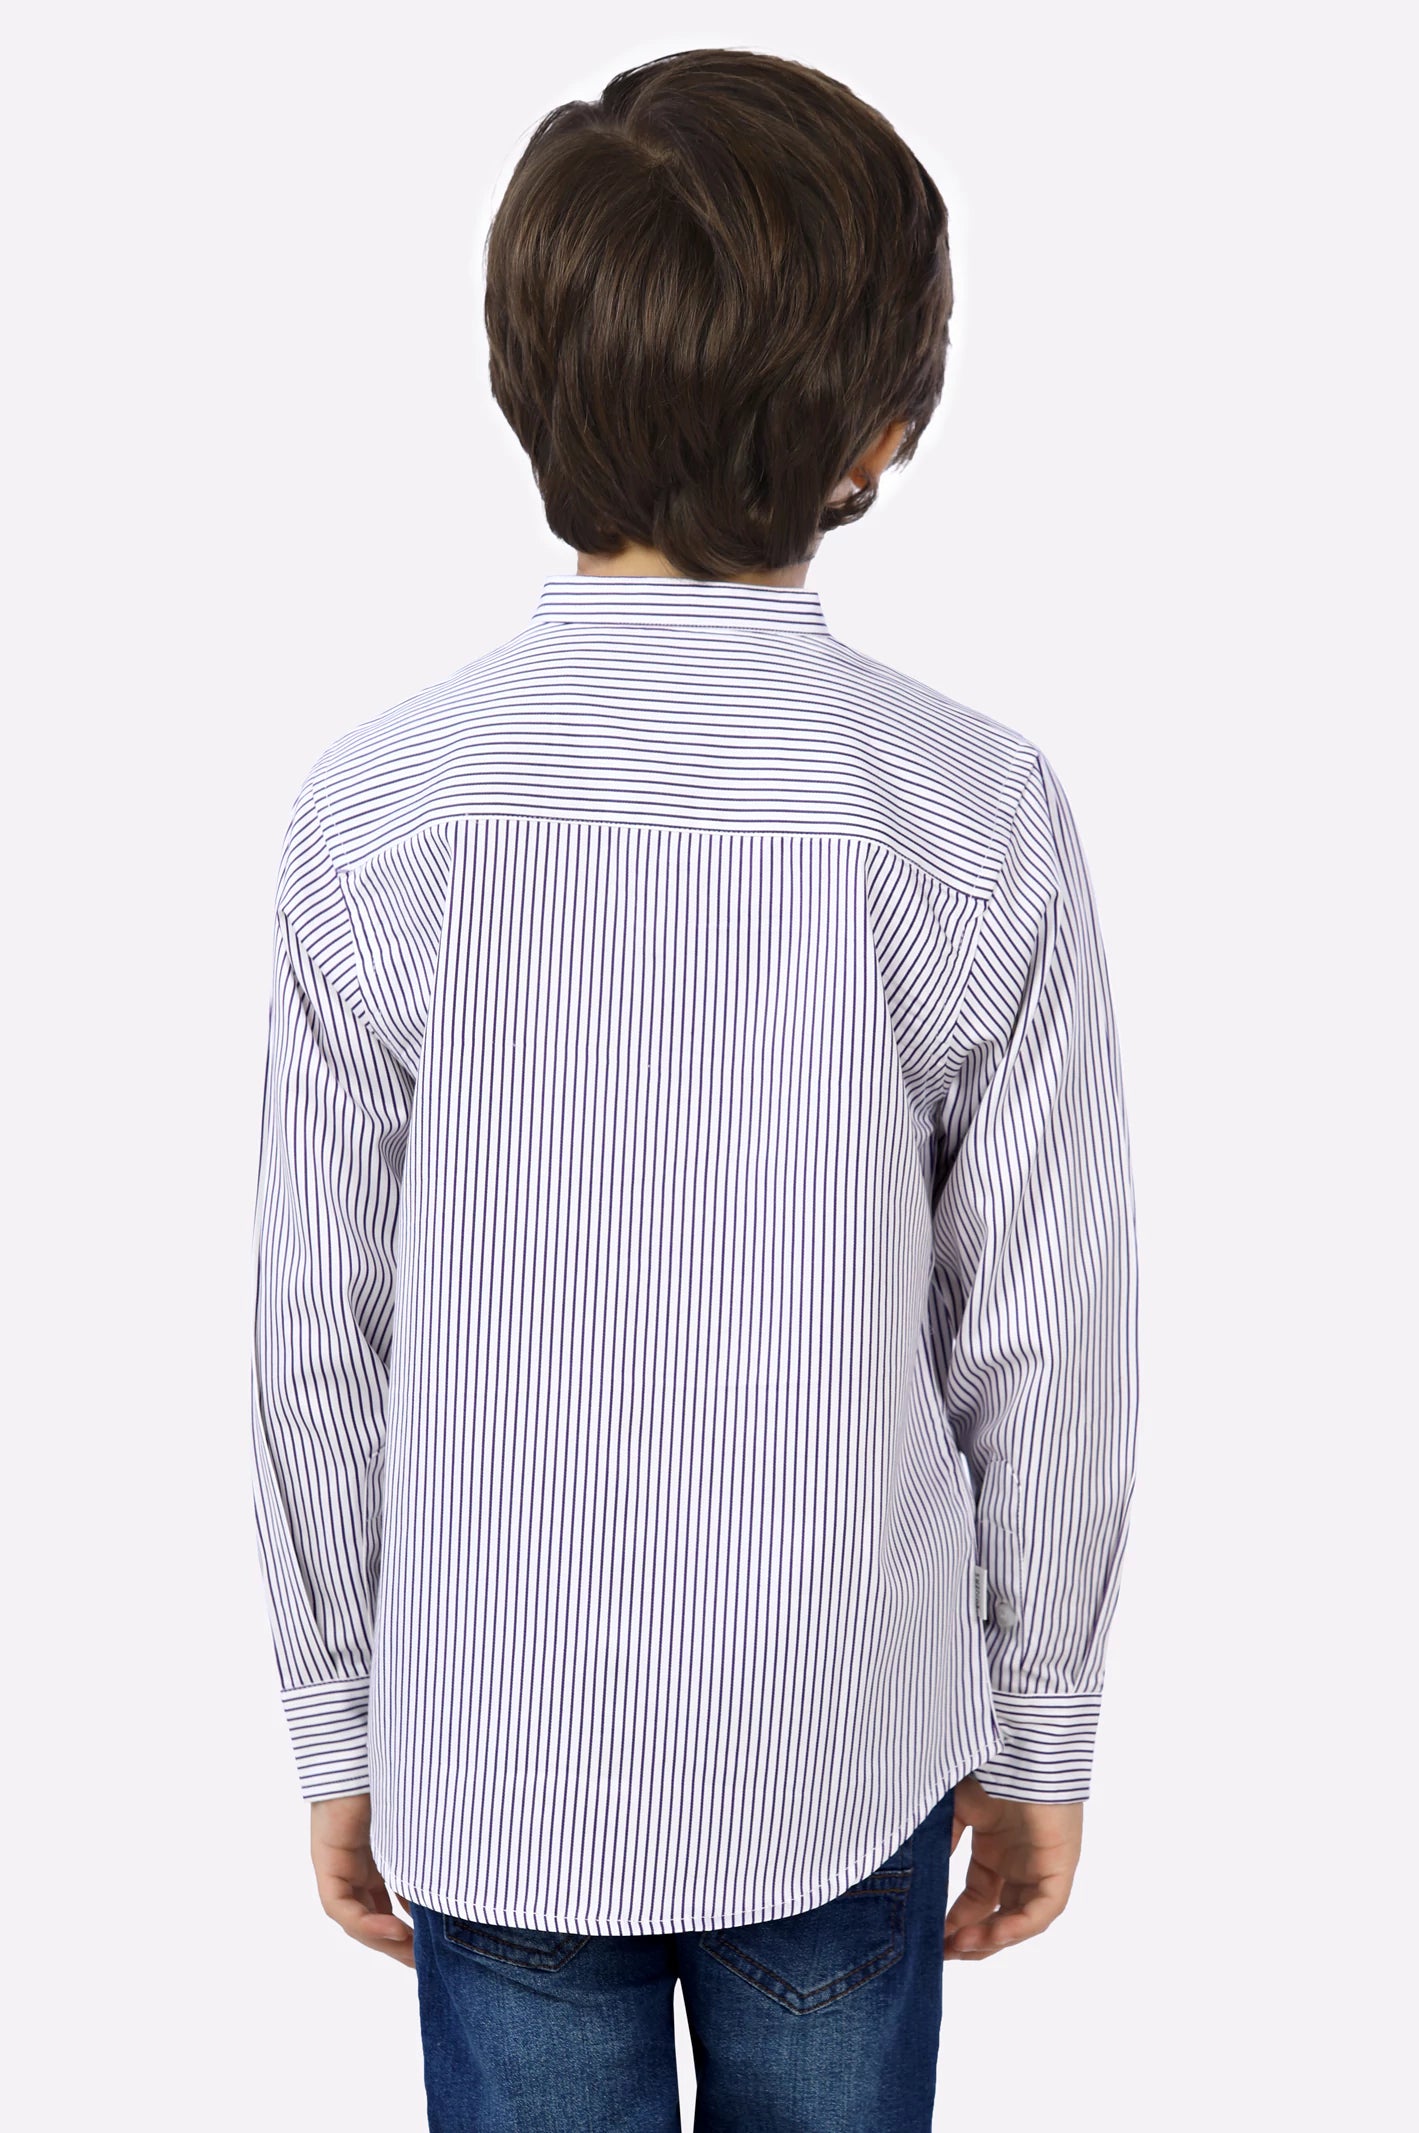 Purple Pinstripe Boys Shirt From Diners